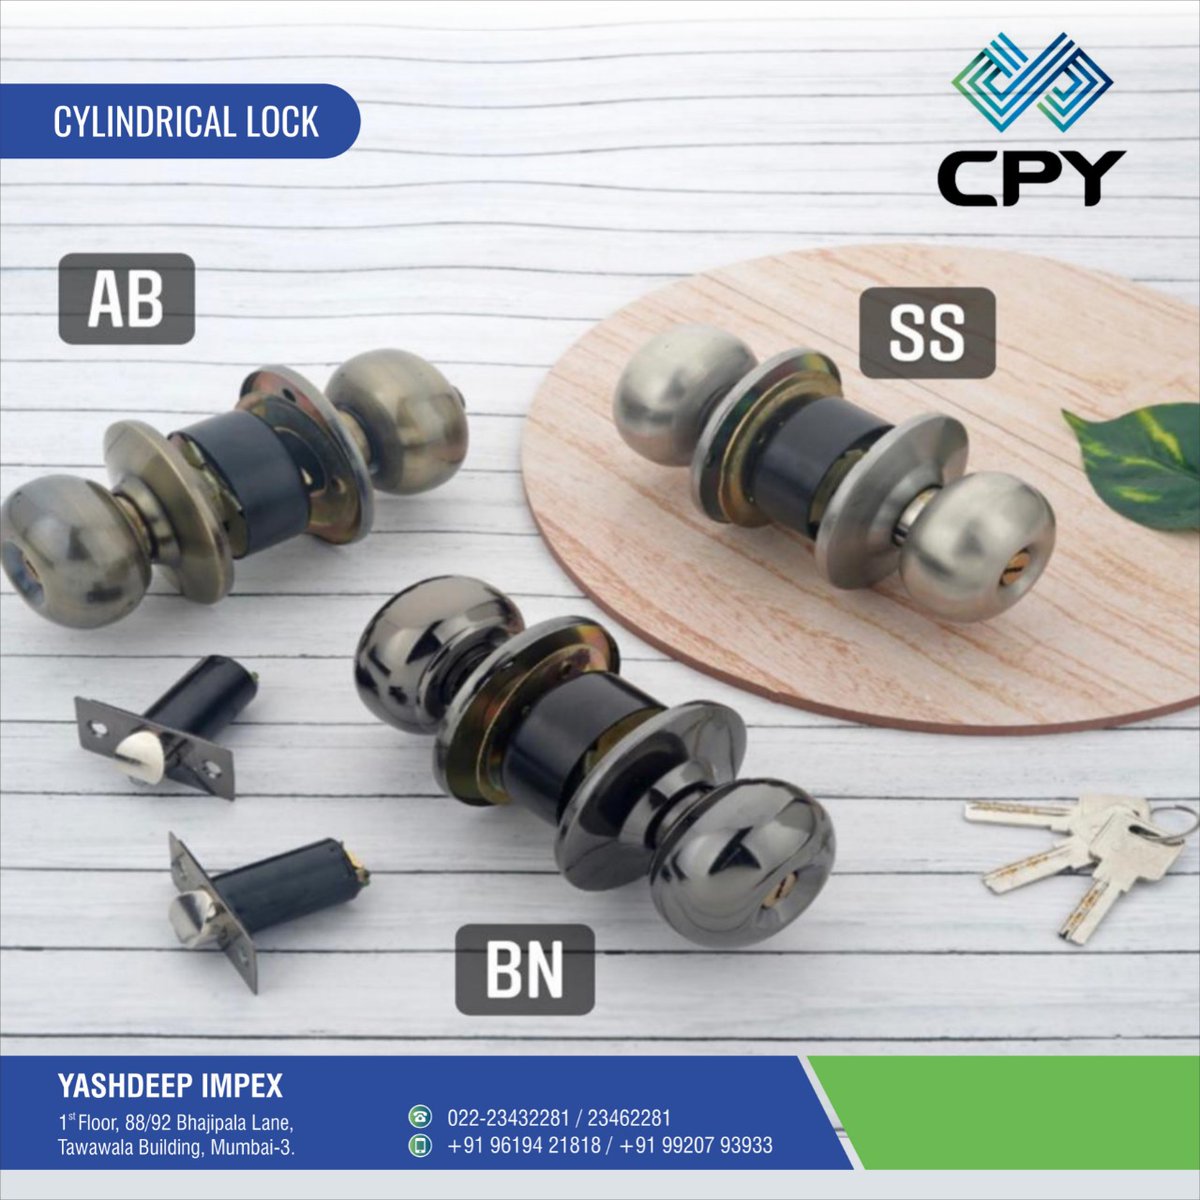 Install CPY Cylinder Lock at your Residential Entrance Doors to ensure the safety of your home. 
#YashdeepImpex #CpyC2Canes #Importer #Mumbai #CylinderLocks #DoorHardware #DoorAccessories #DoorSolutions #FurnitureHardware #DoorLocks #LockingSolutions